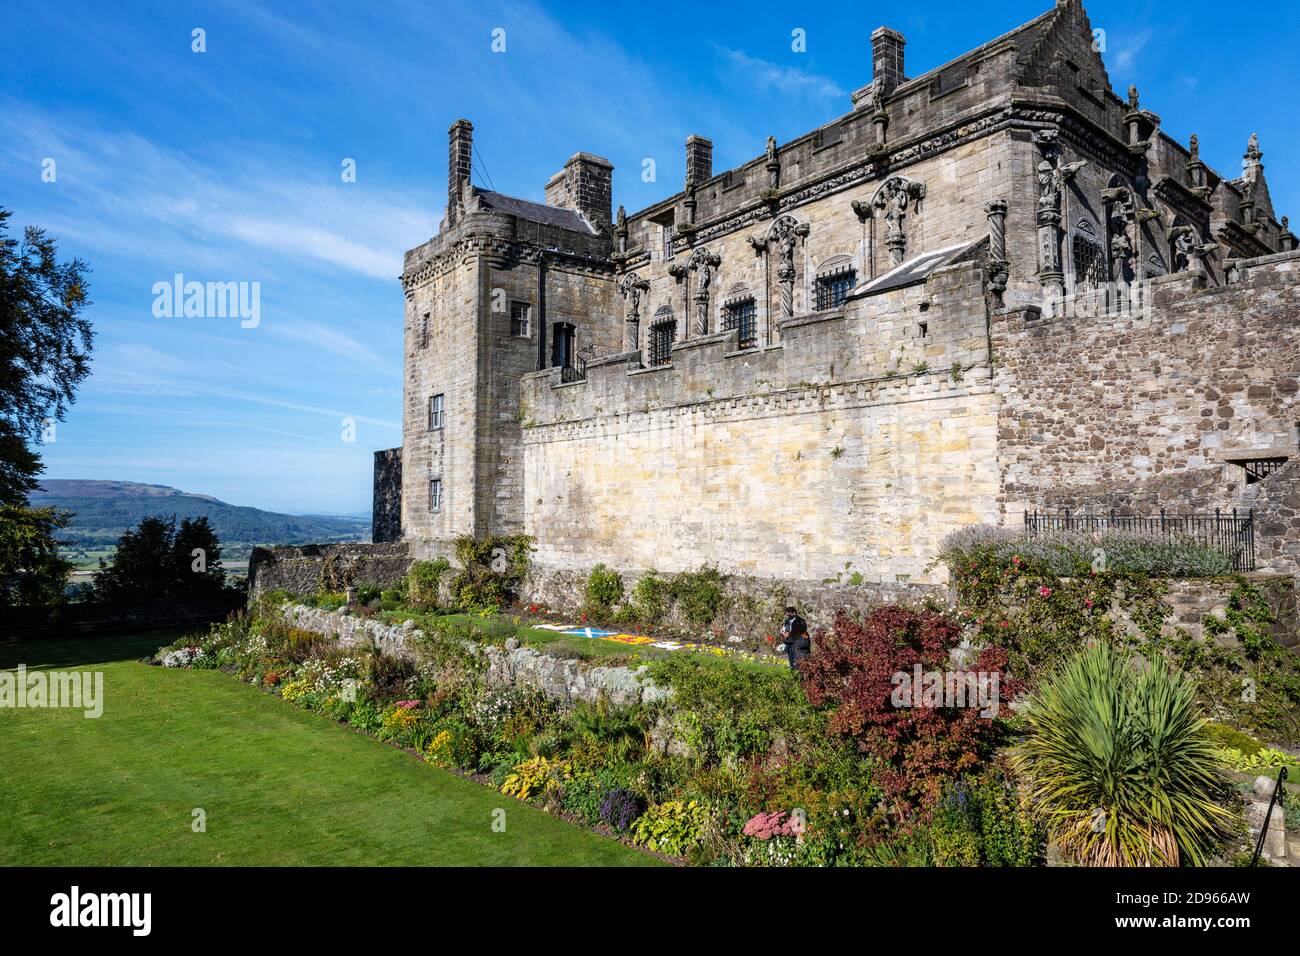 The Royal Palace viewed from the Queen Anne Gardens – Stirling Castle, Scotland, UK Stock Photo